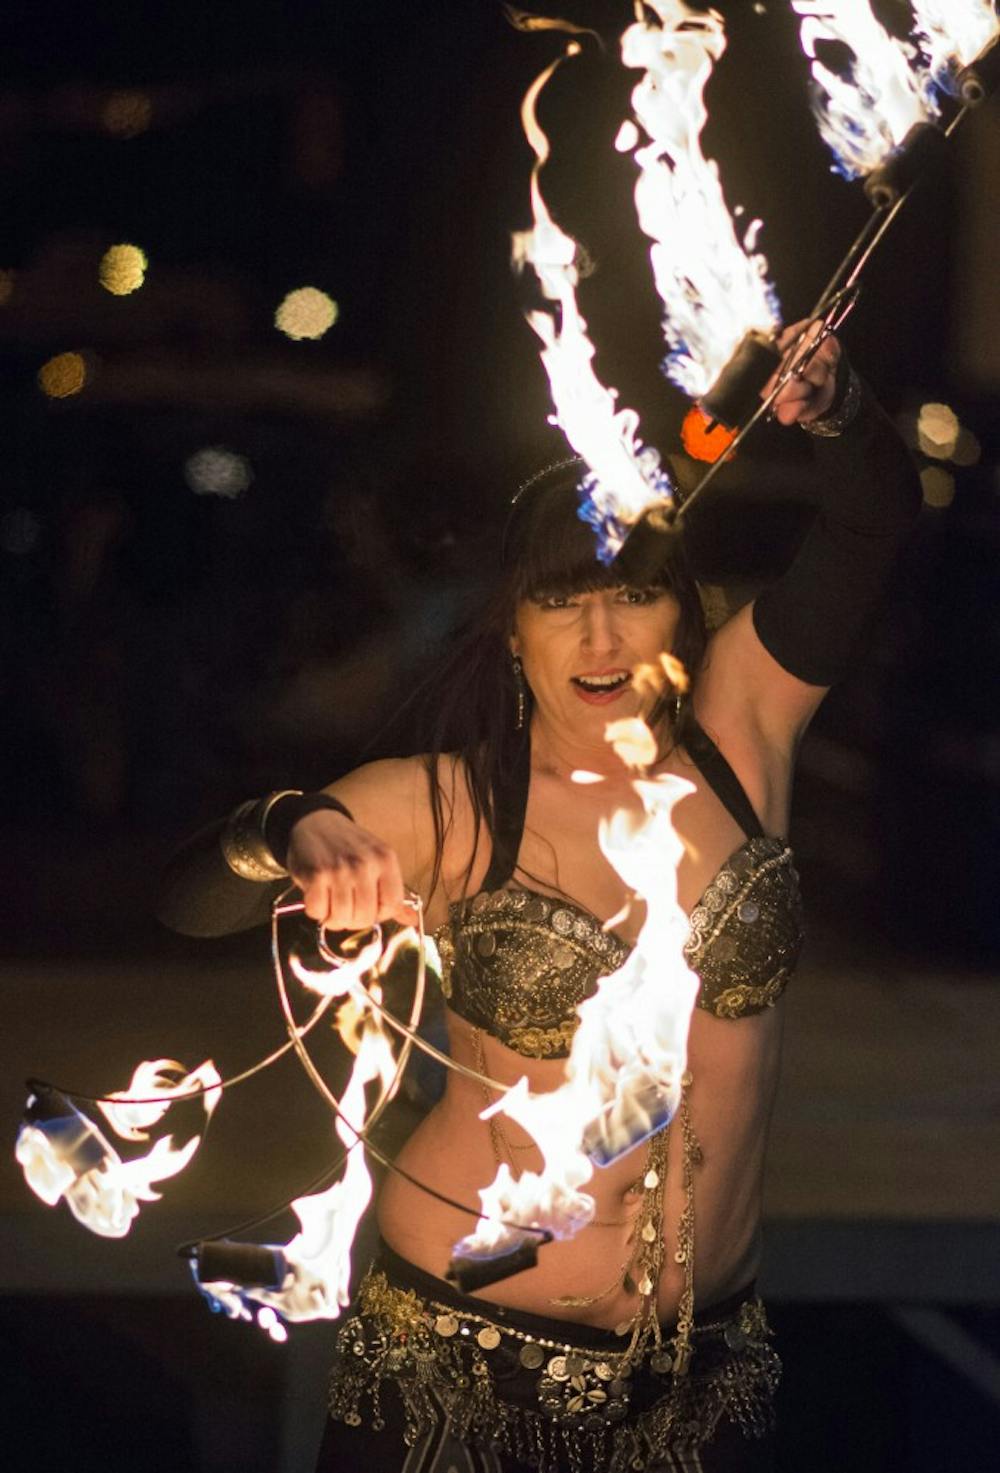 A belly dancer performs her fire artistry Saturday at the Muncie Gras event in downtown Muncie. DN PHOTO SAMANTHA BLANKENSHIP